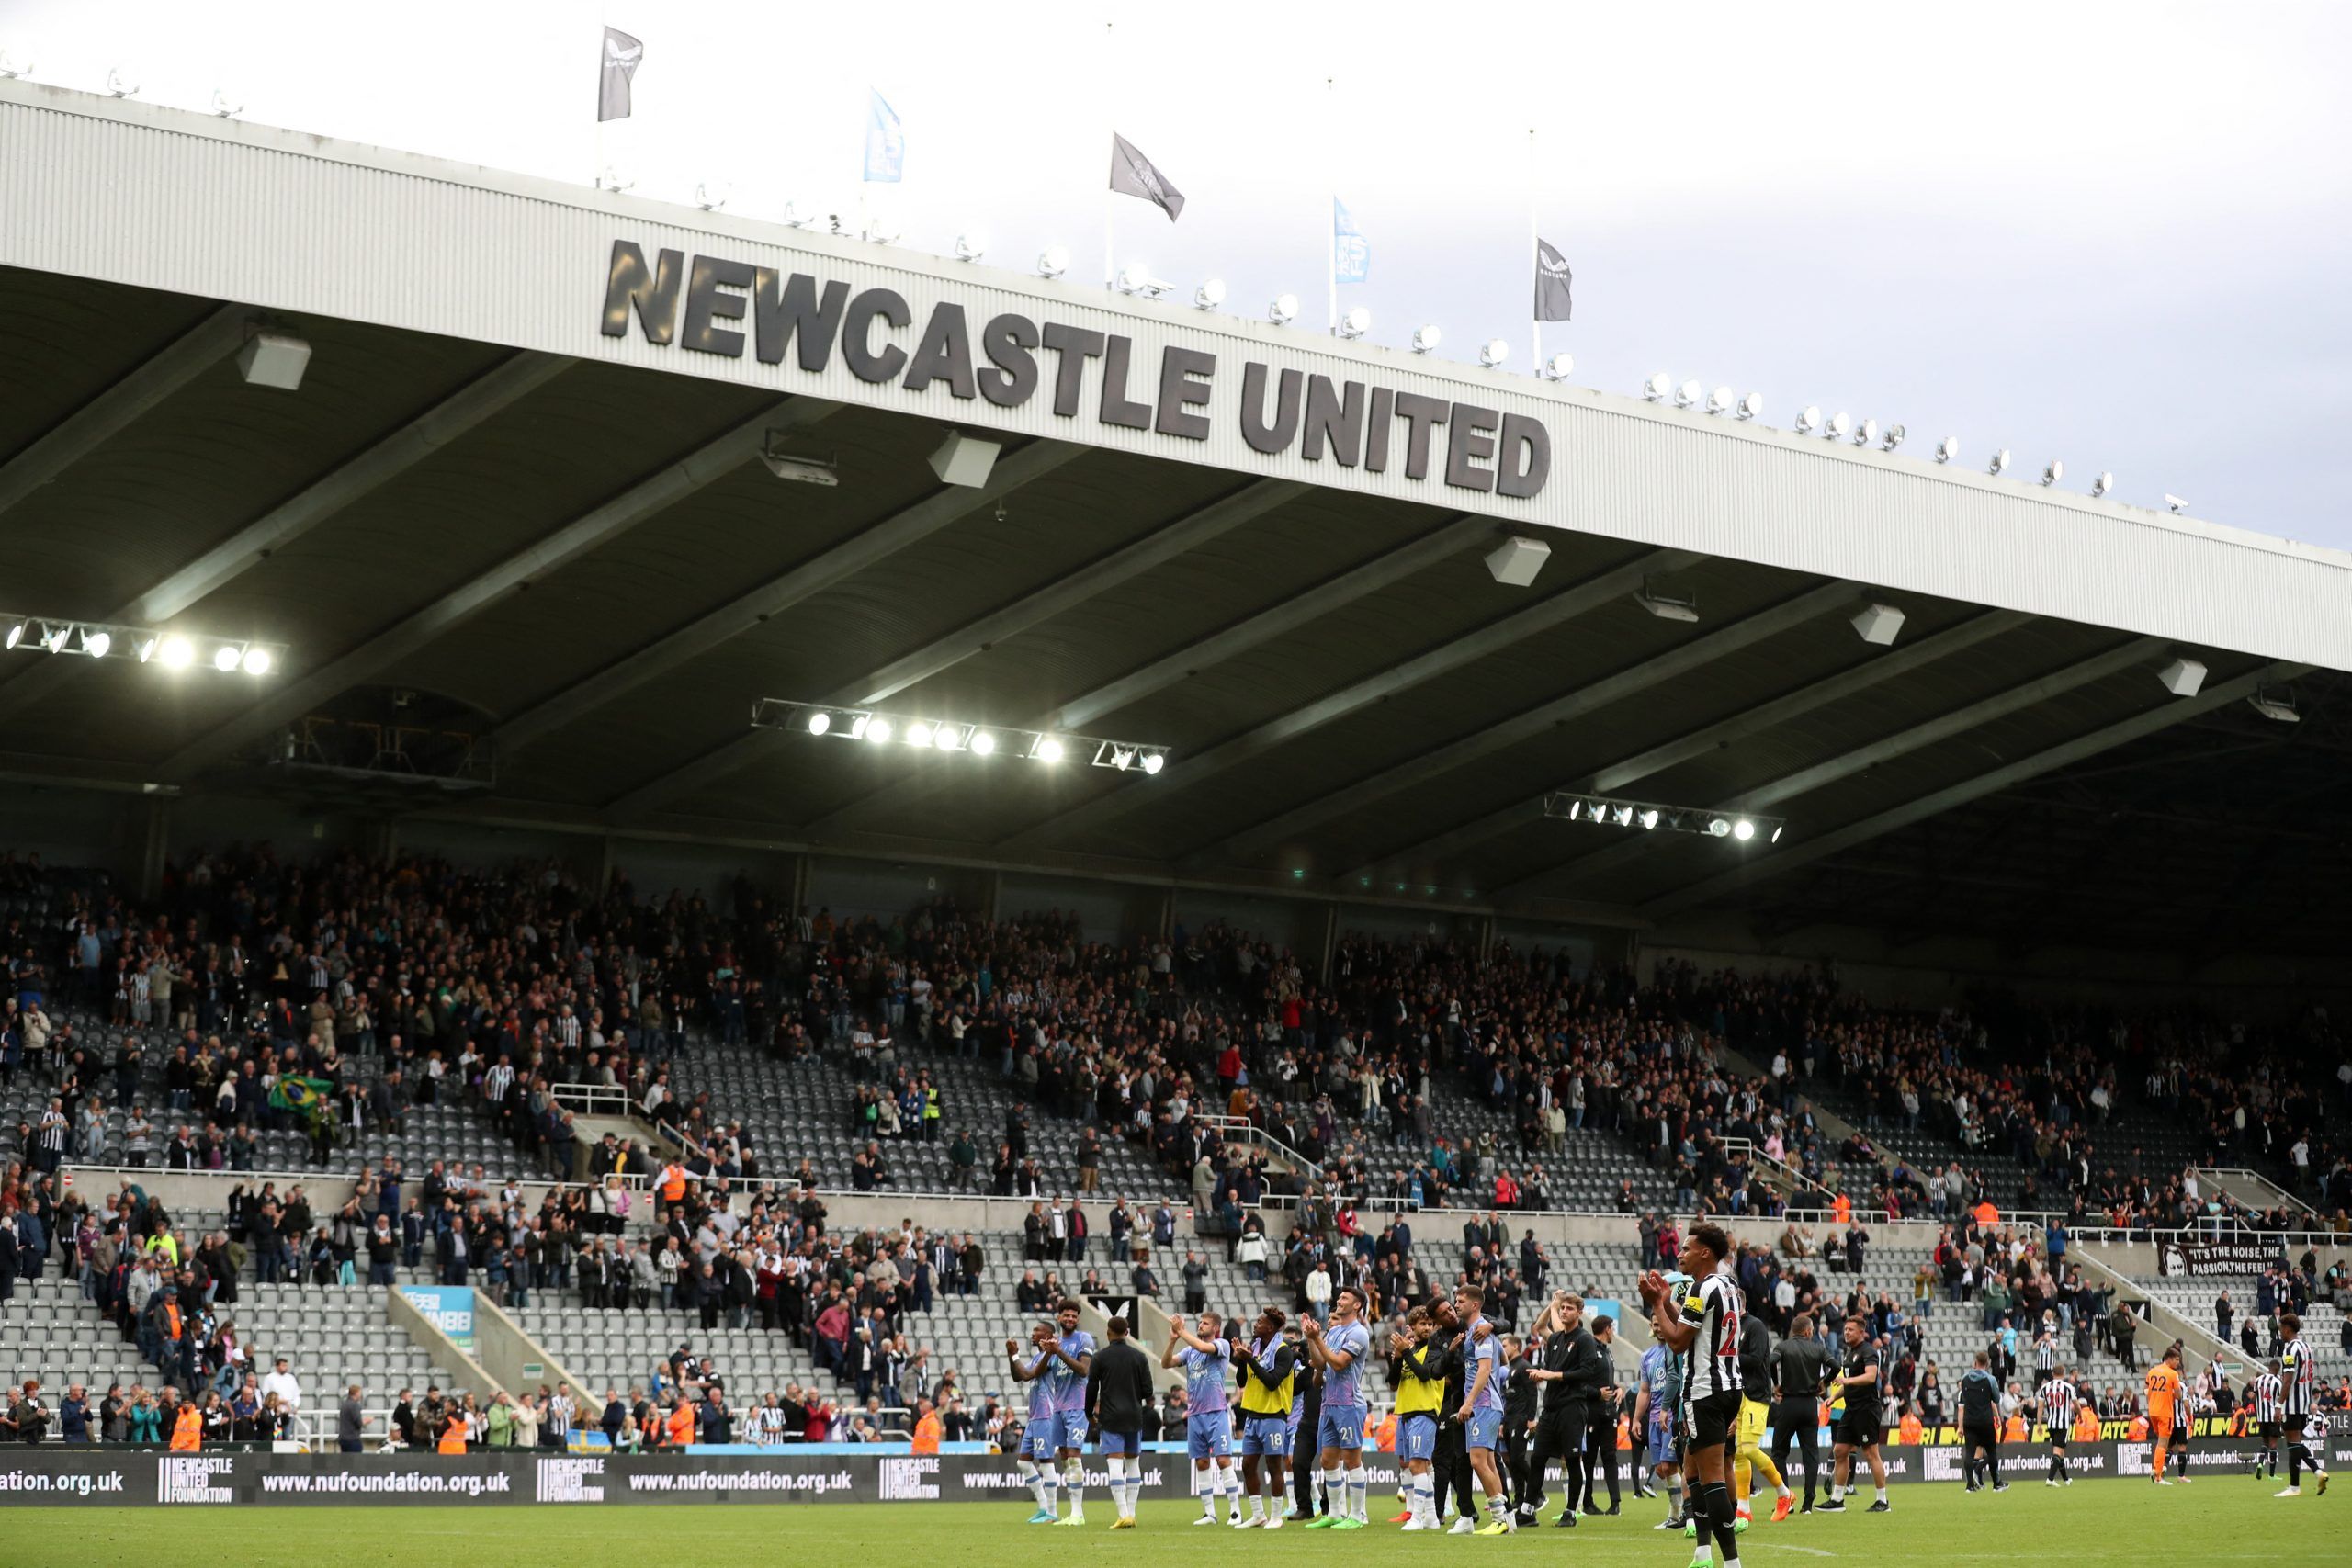 Newcastle may get £200m windfall from stadium naming rights -Newcastle United News